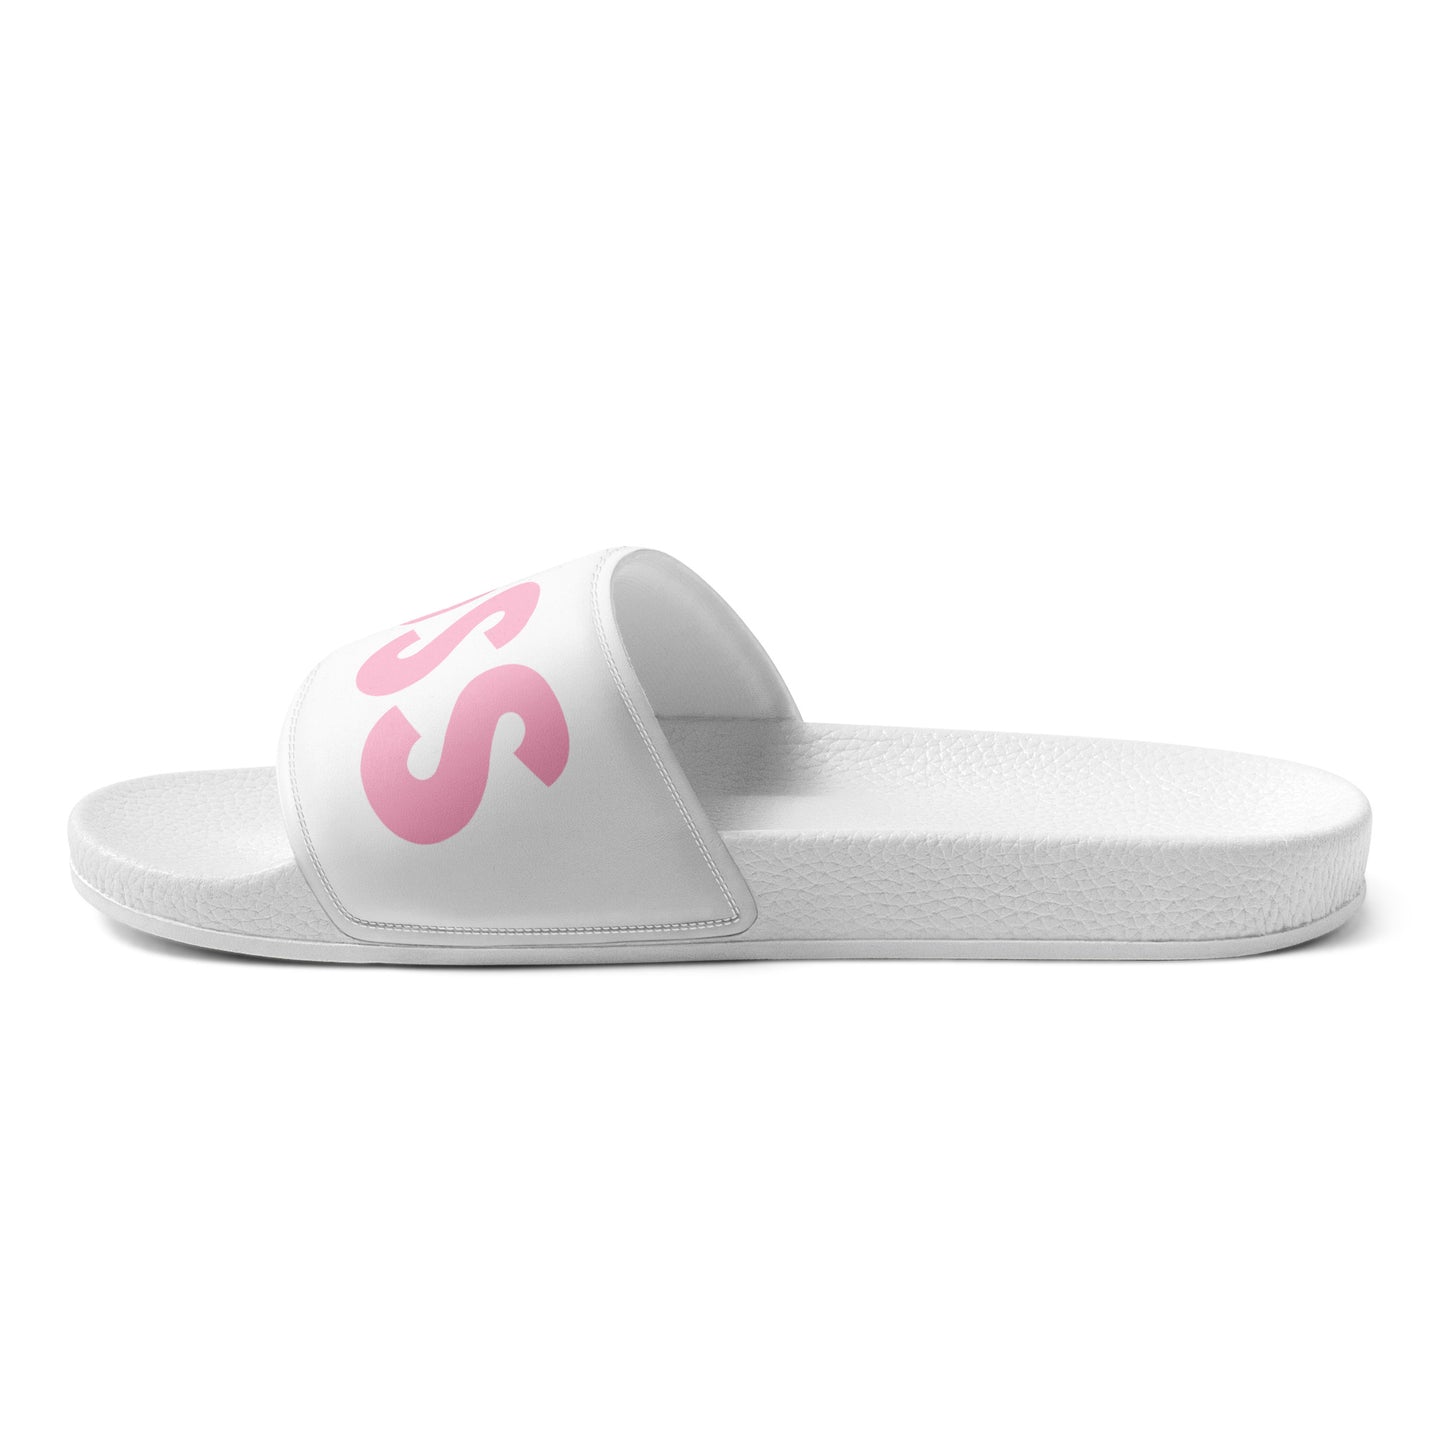 Women's slides | White and Pink